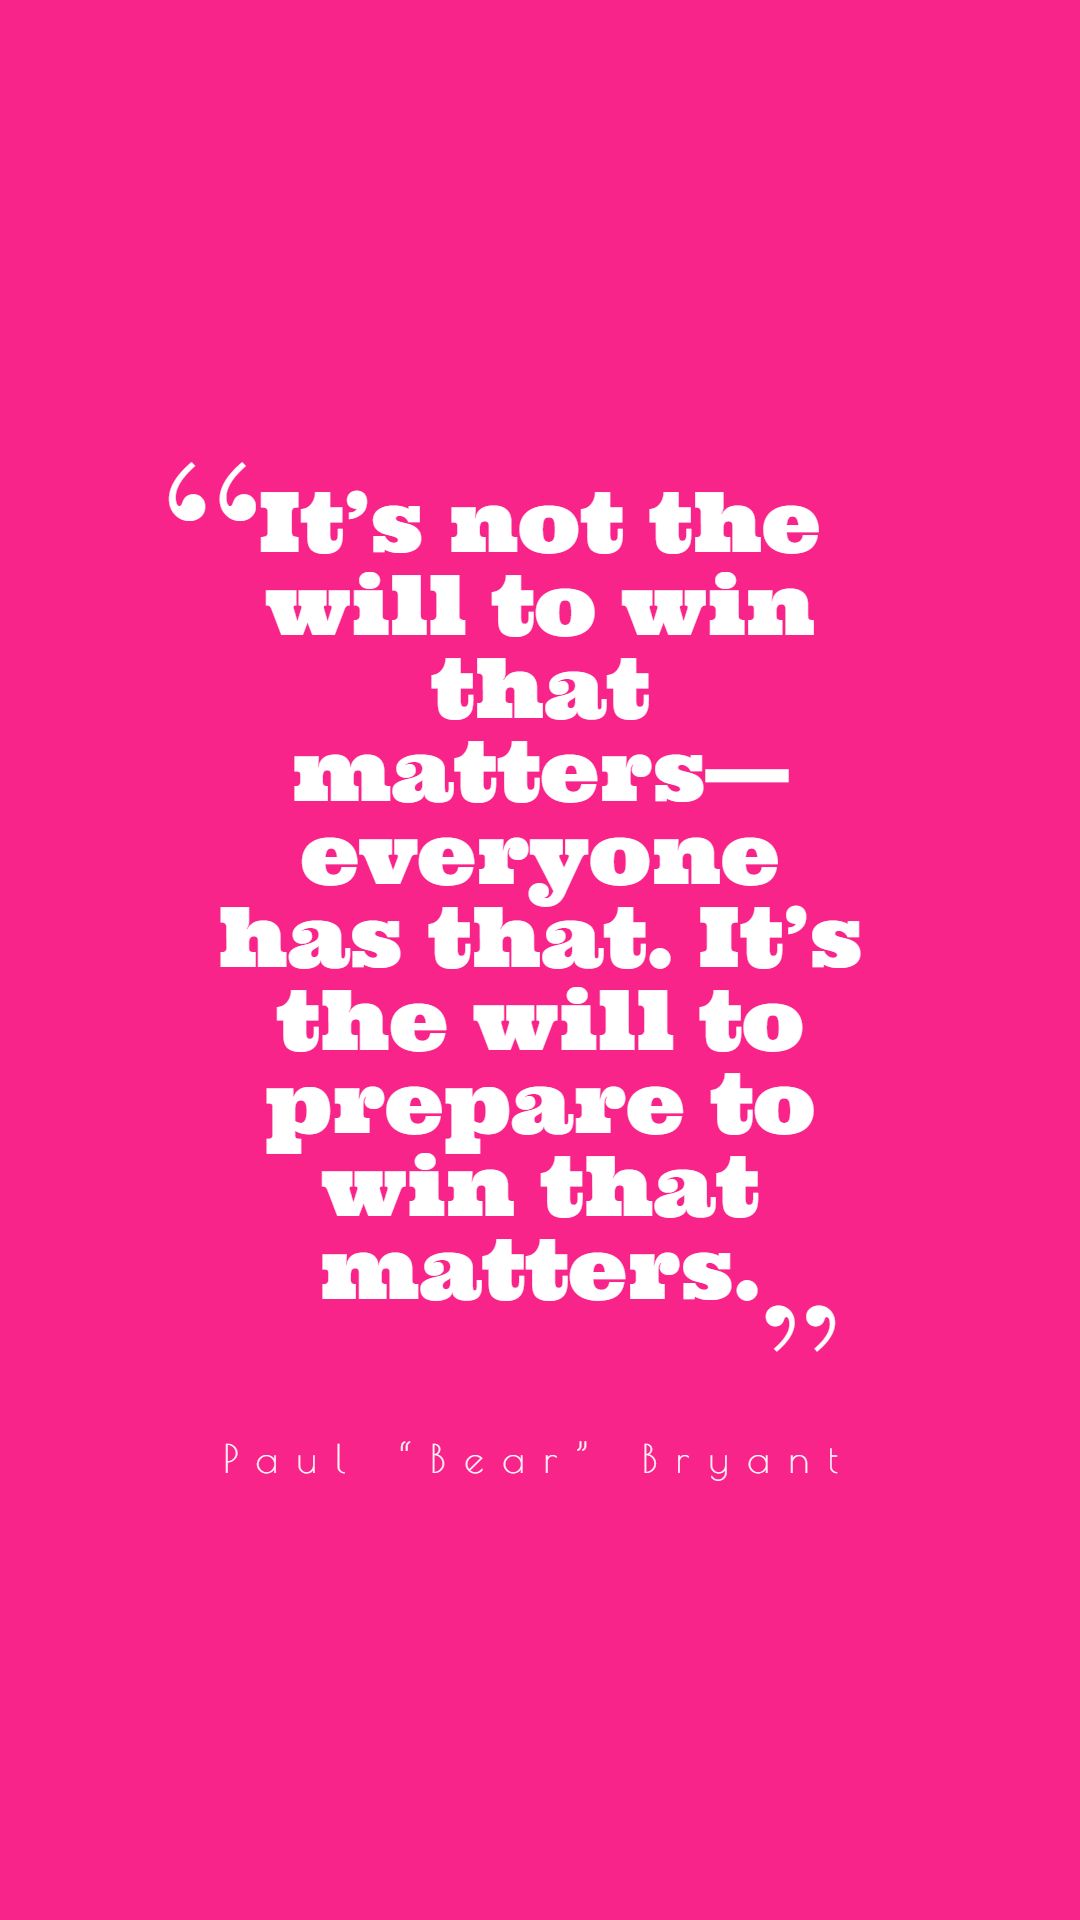 It’s not the will to win that matters—everyone has that. It’s the will to prepare to win that matters.